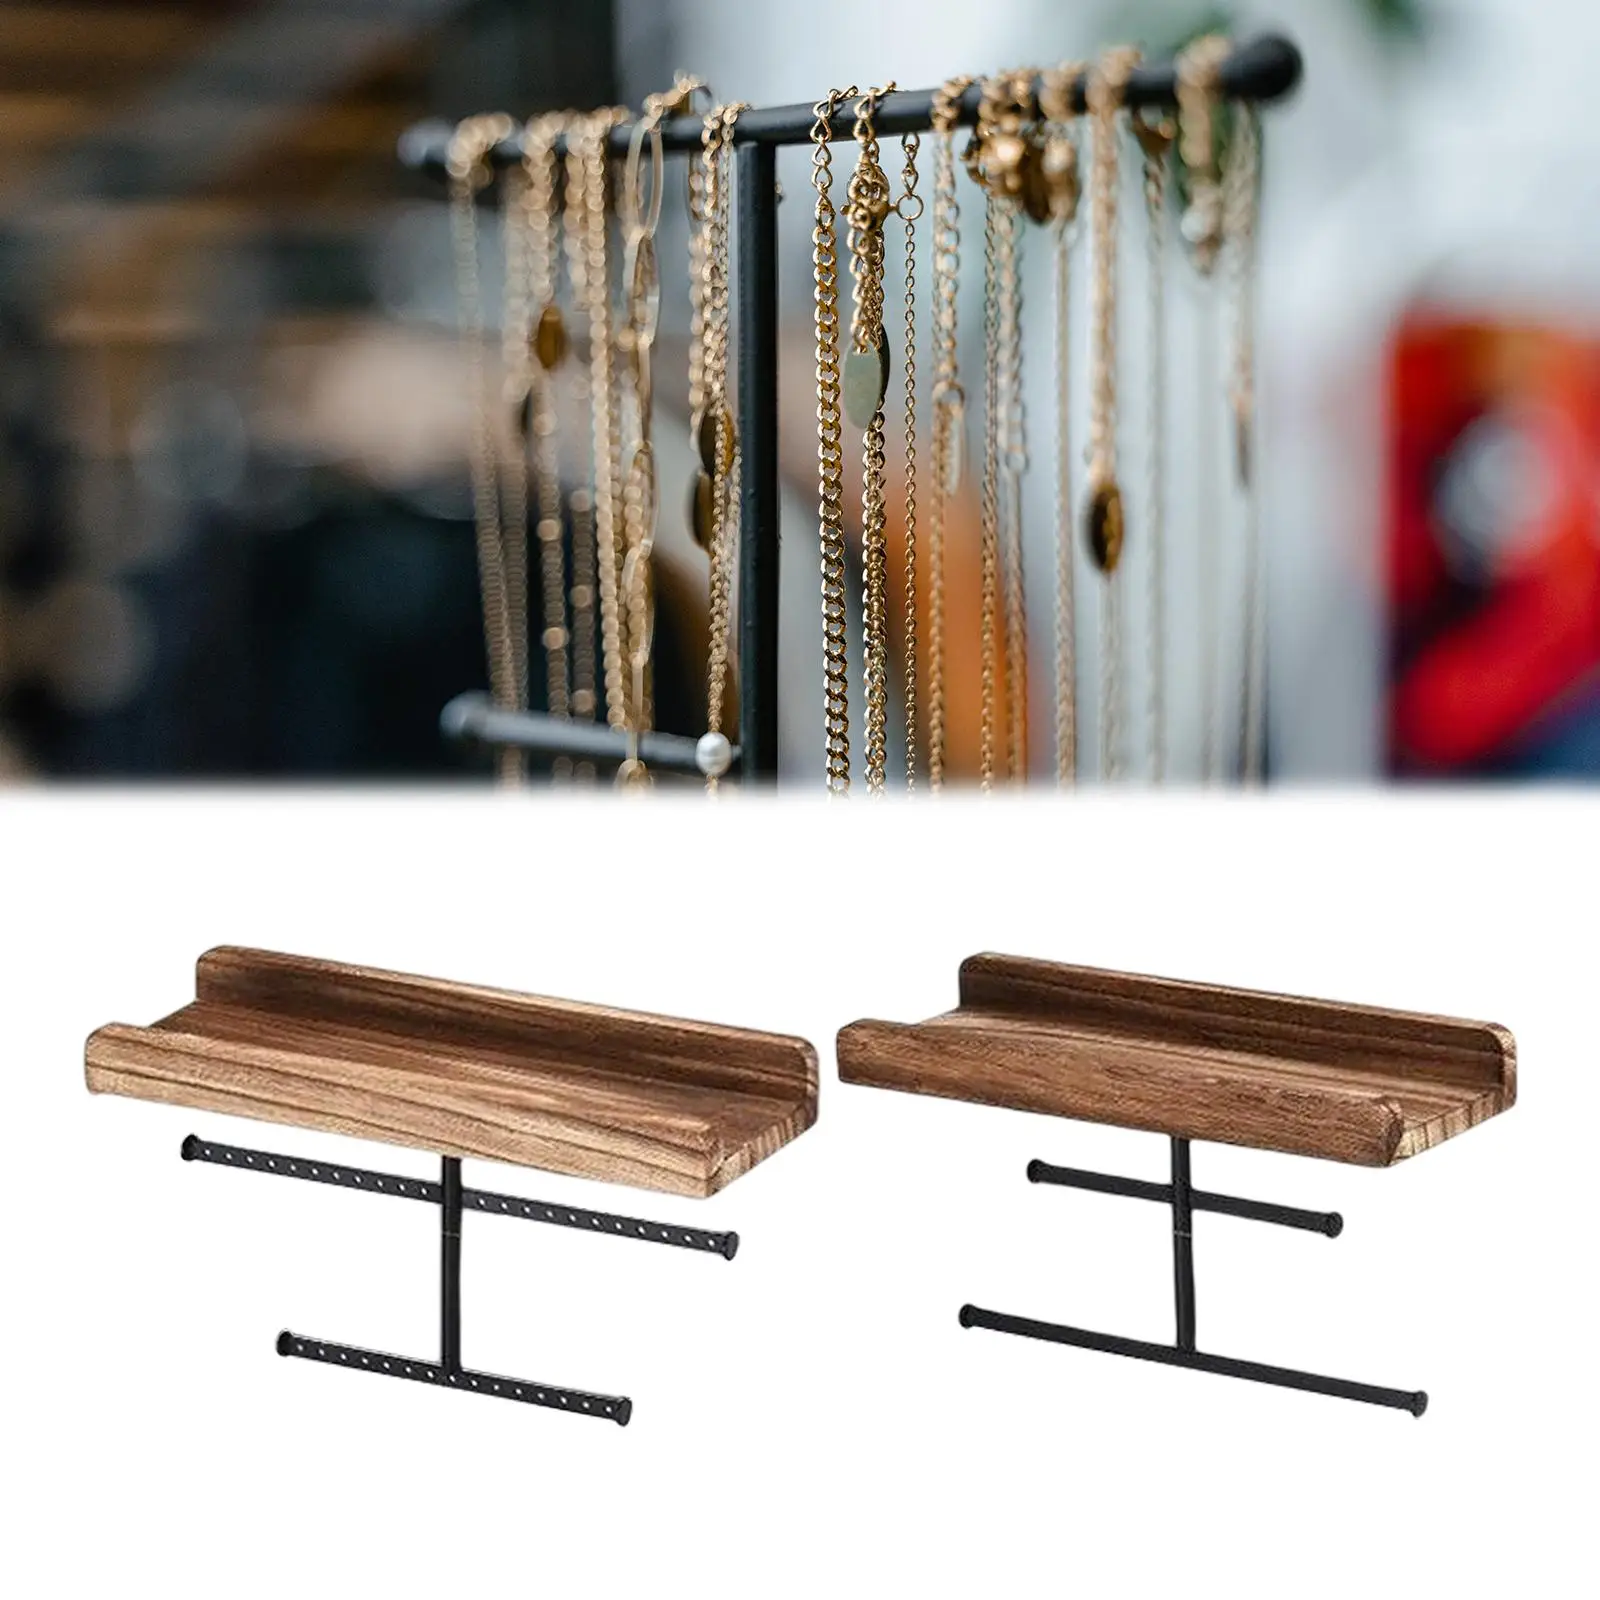 2Pcs Hanging Wall Mounted Jewelry Organizer with Hook Holes Decor Rustic Wood Showroom Rack for Earrings Bangles Bracelet Rings